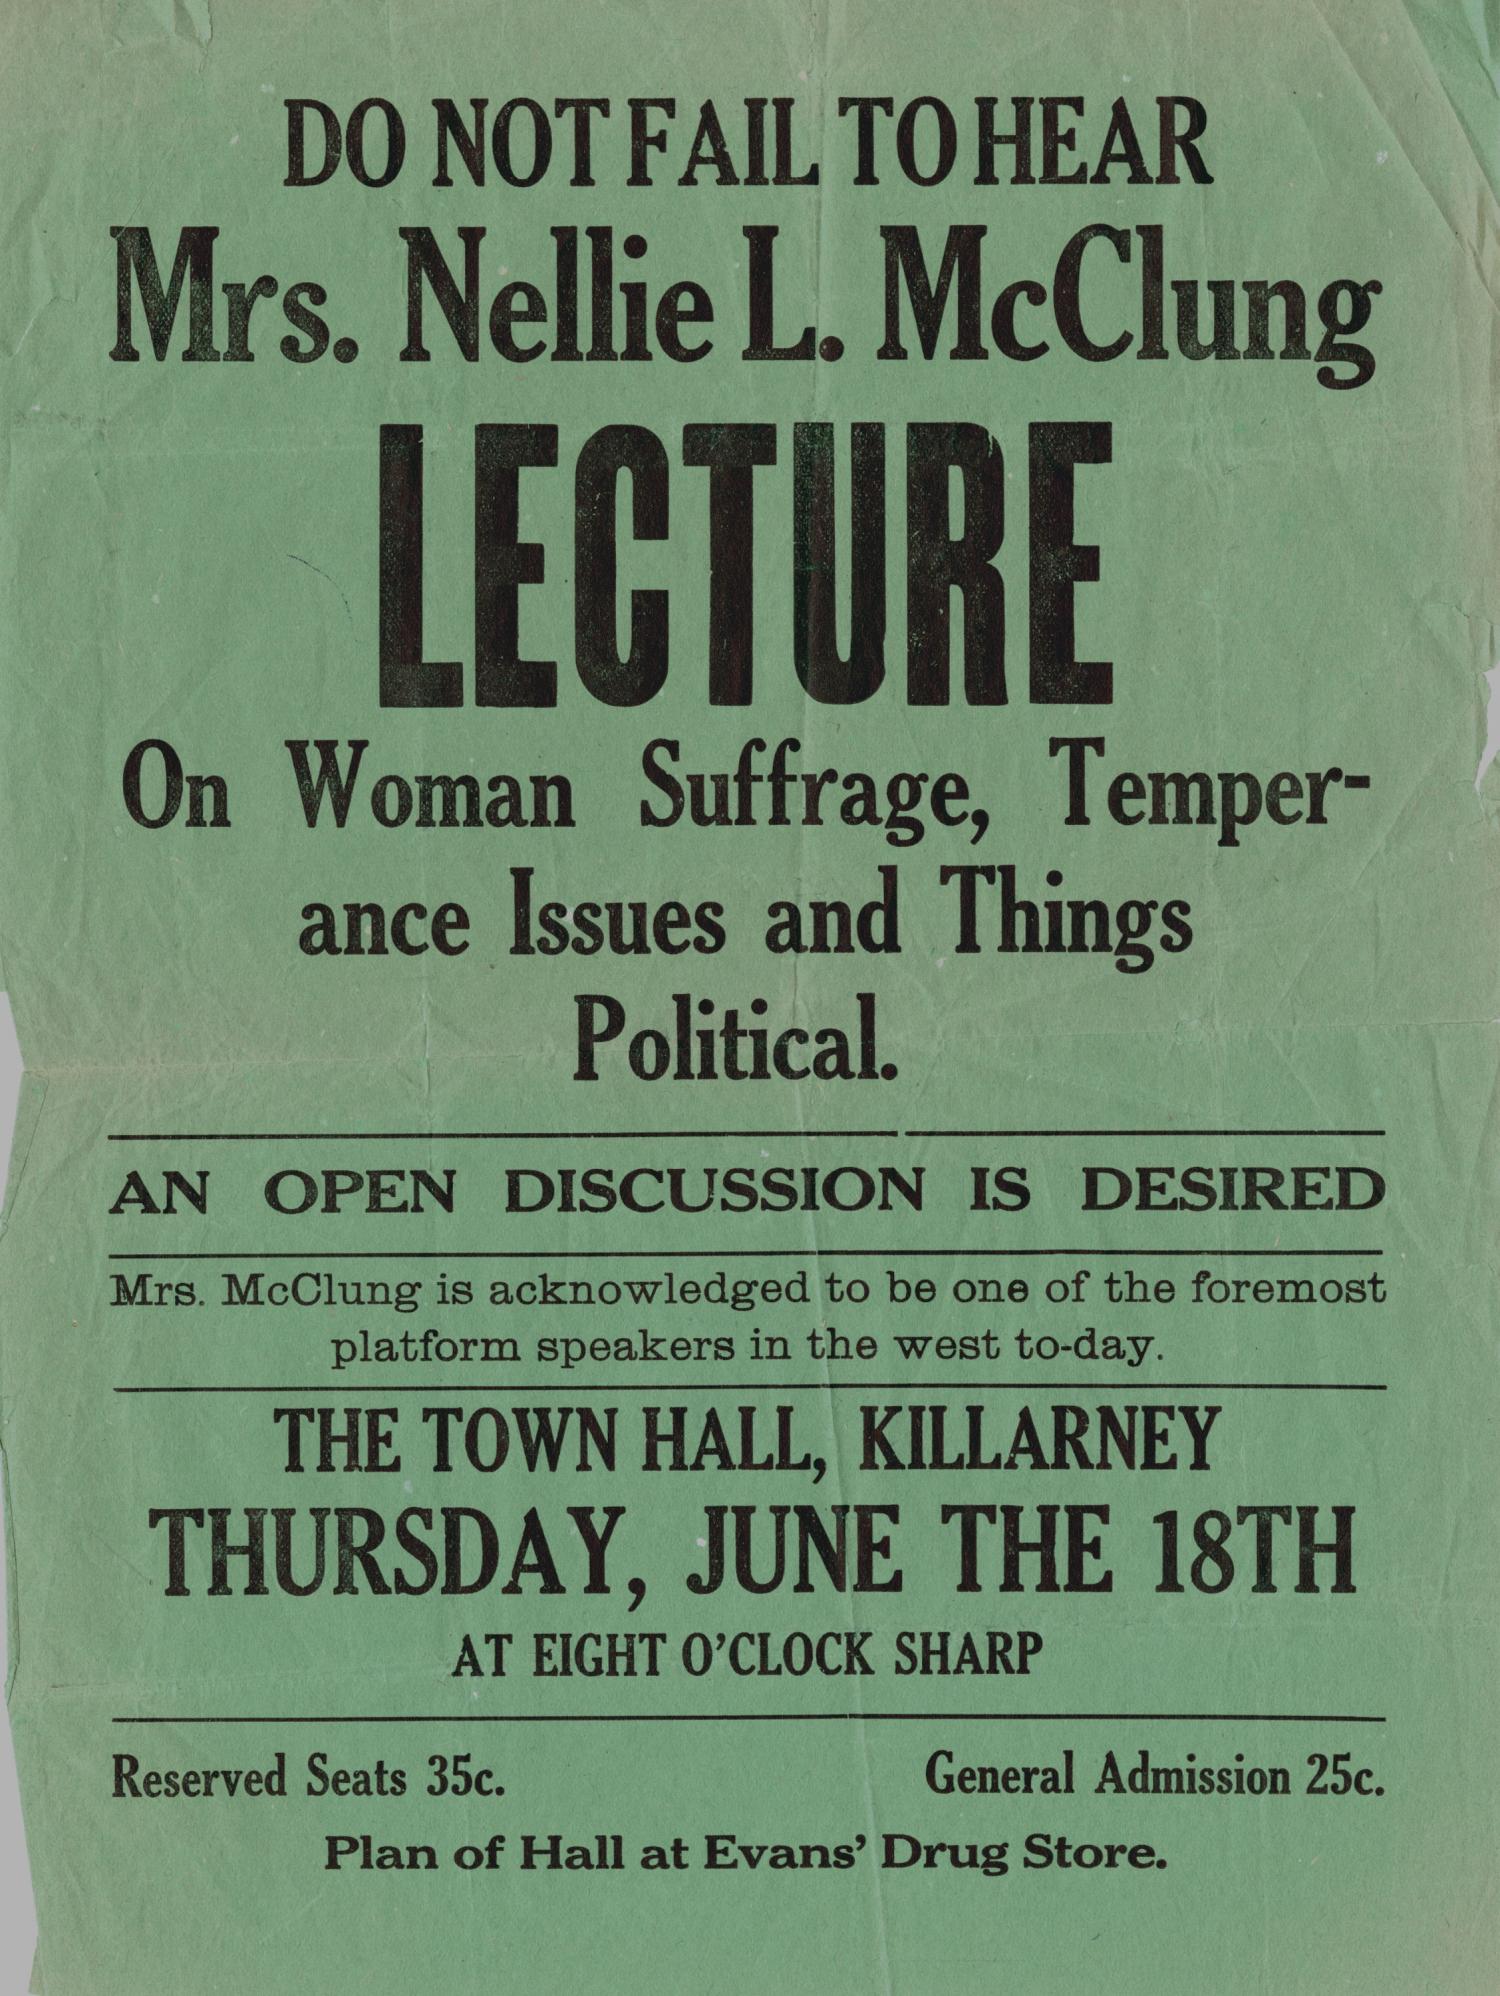 Poster promoting lecture by Nellie McClung